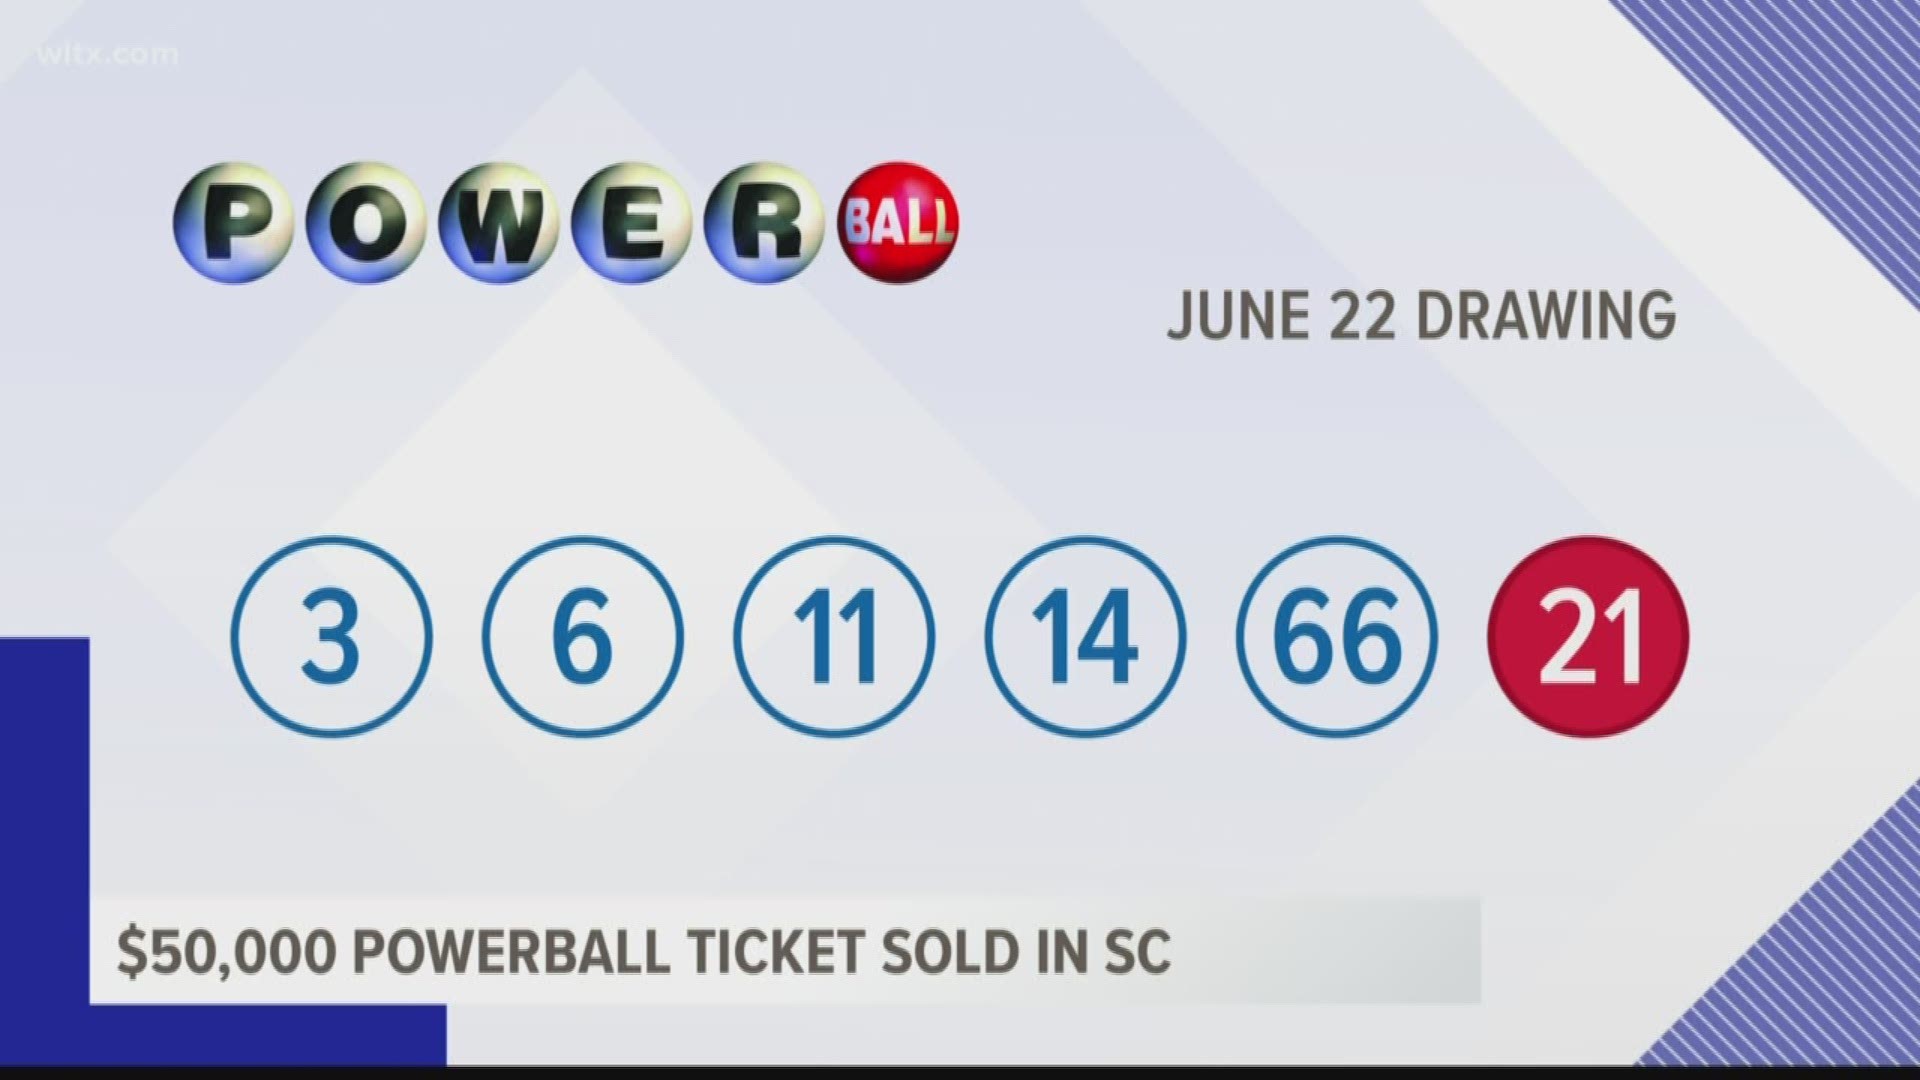 A Powerball ticket worth $50,000 was sold in South Carolina.